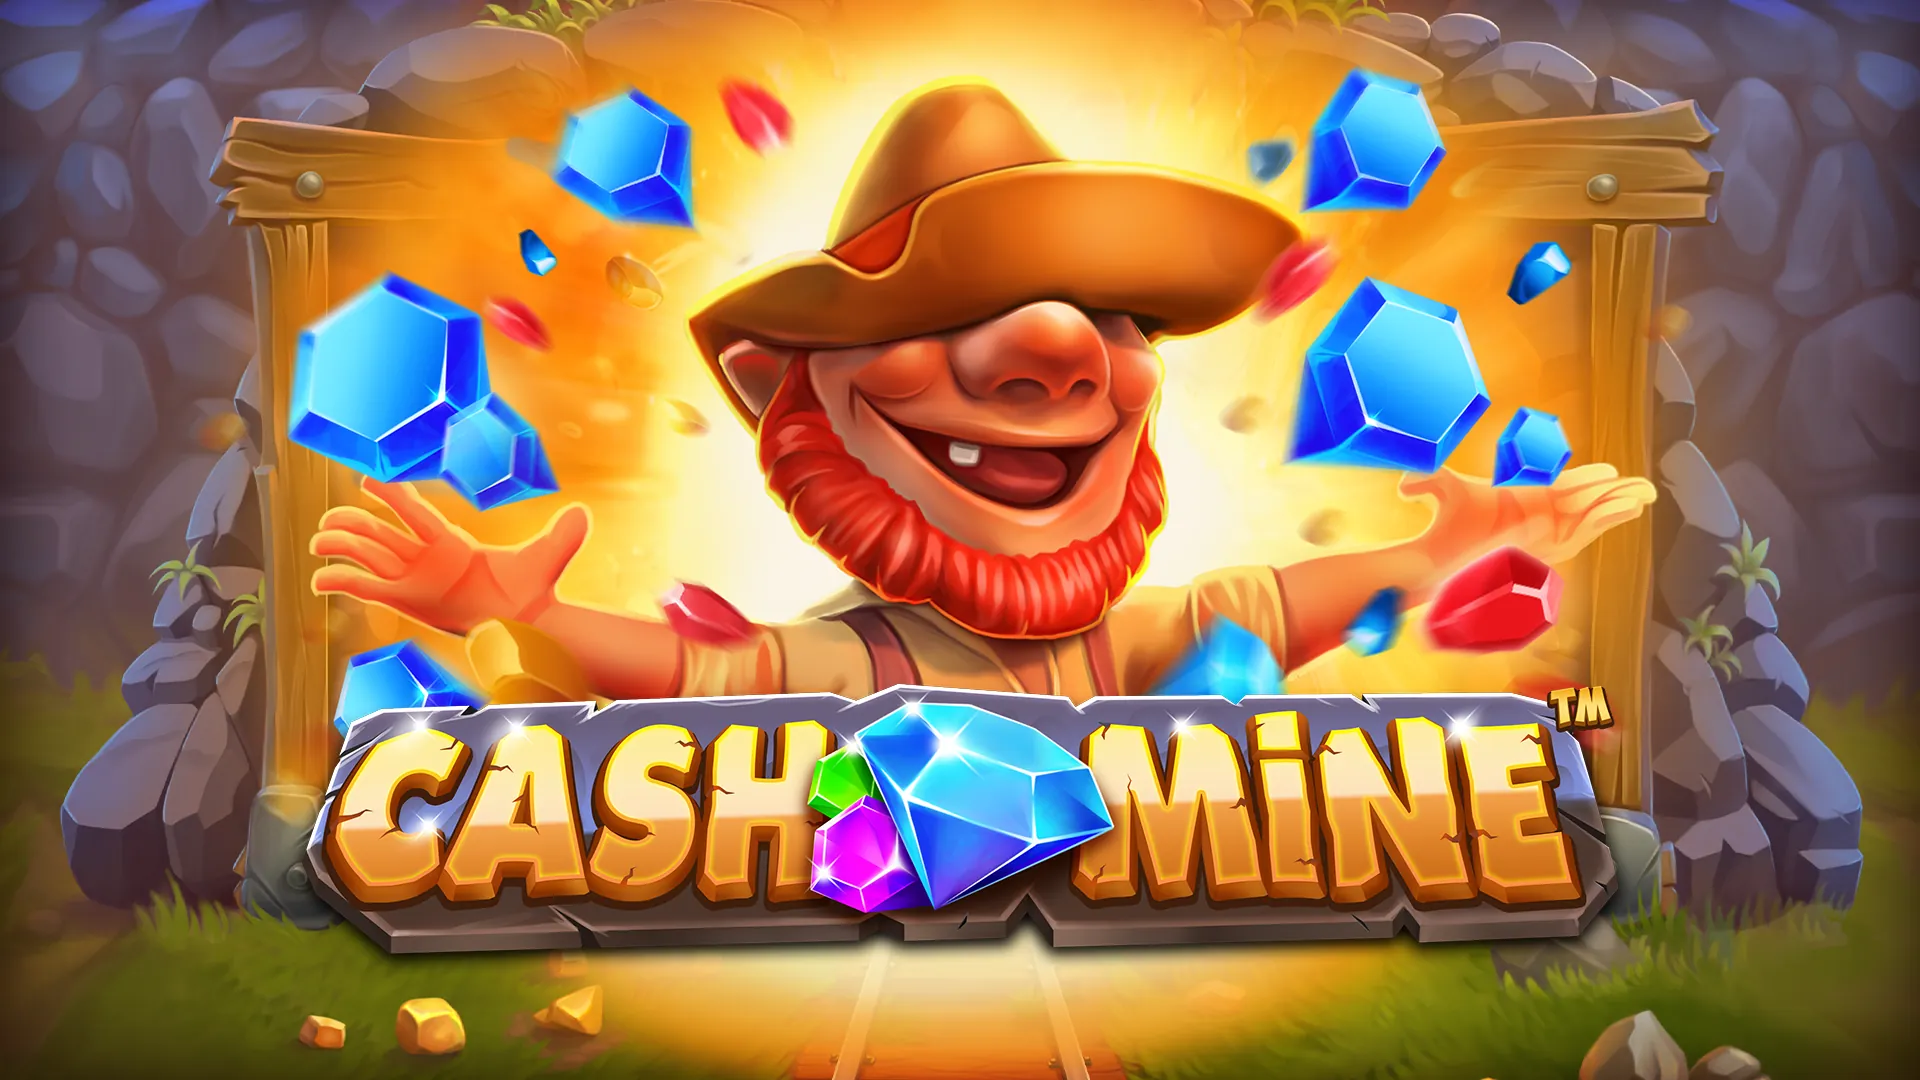 Cash Mine is now live